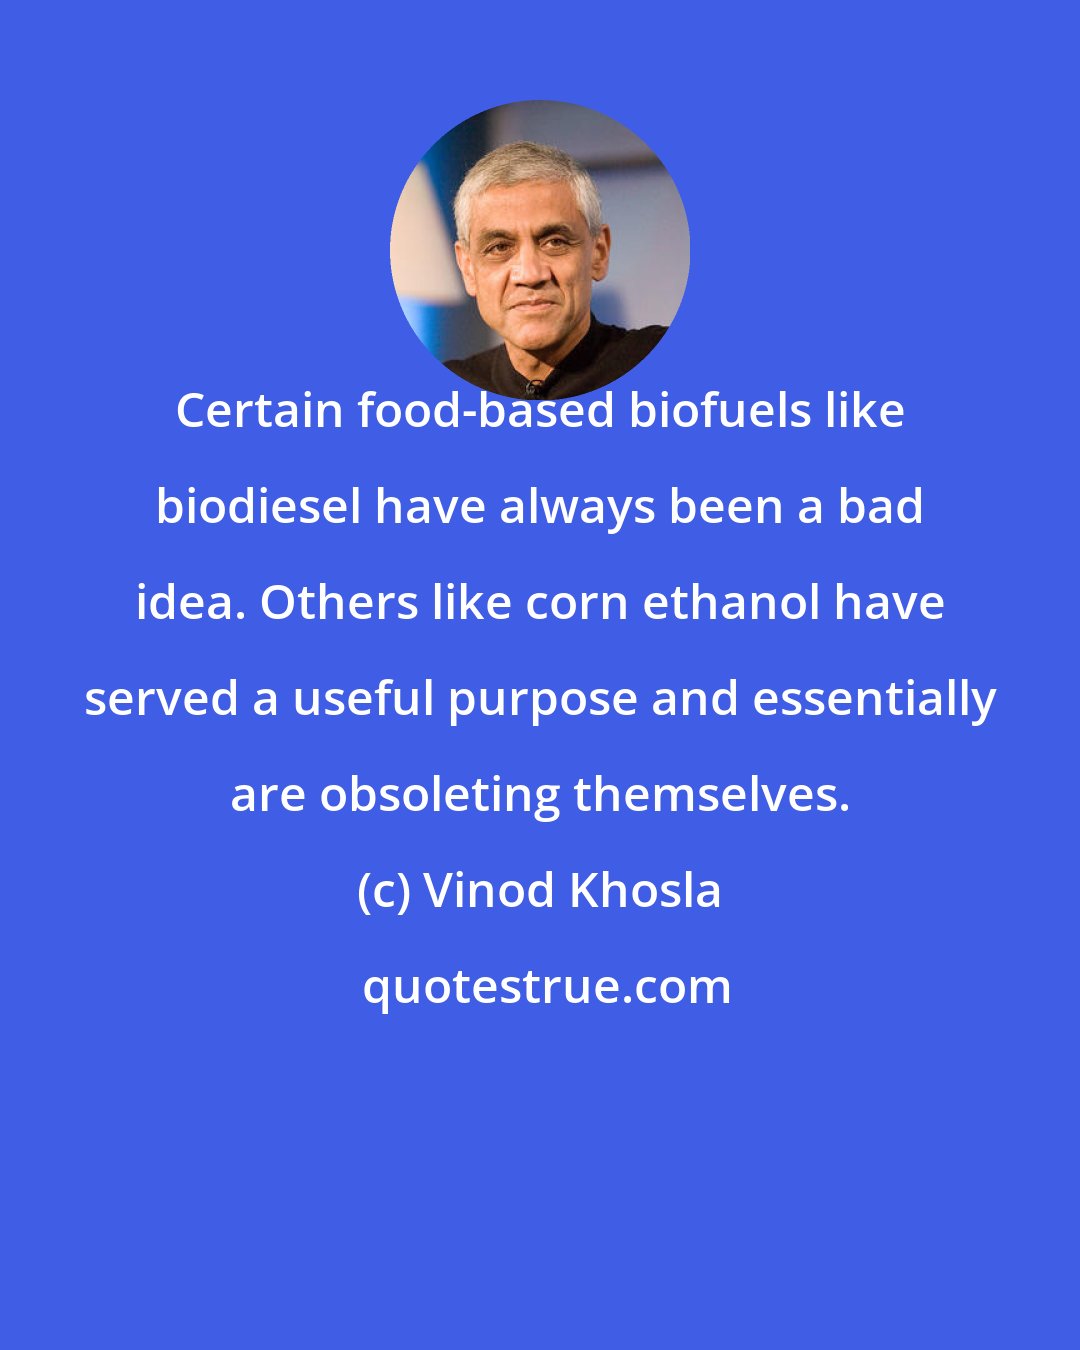 Vinod Khosla: Certain food-based biofuels like biodiesel have always been a bad idea. Others like corn ethanol have served a useful purpose and essentially are obsoleting themselves.